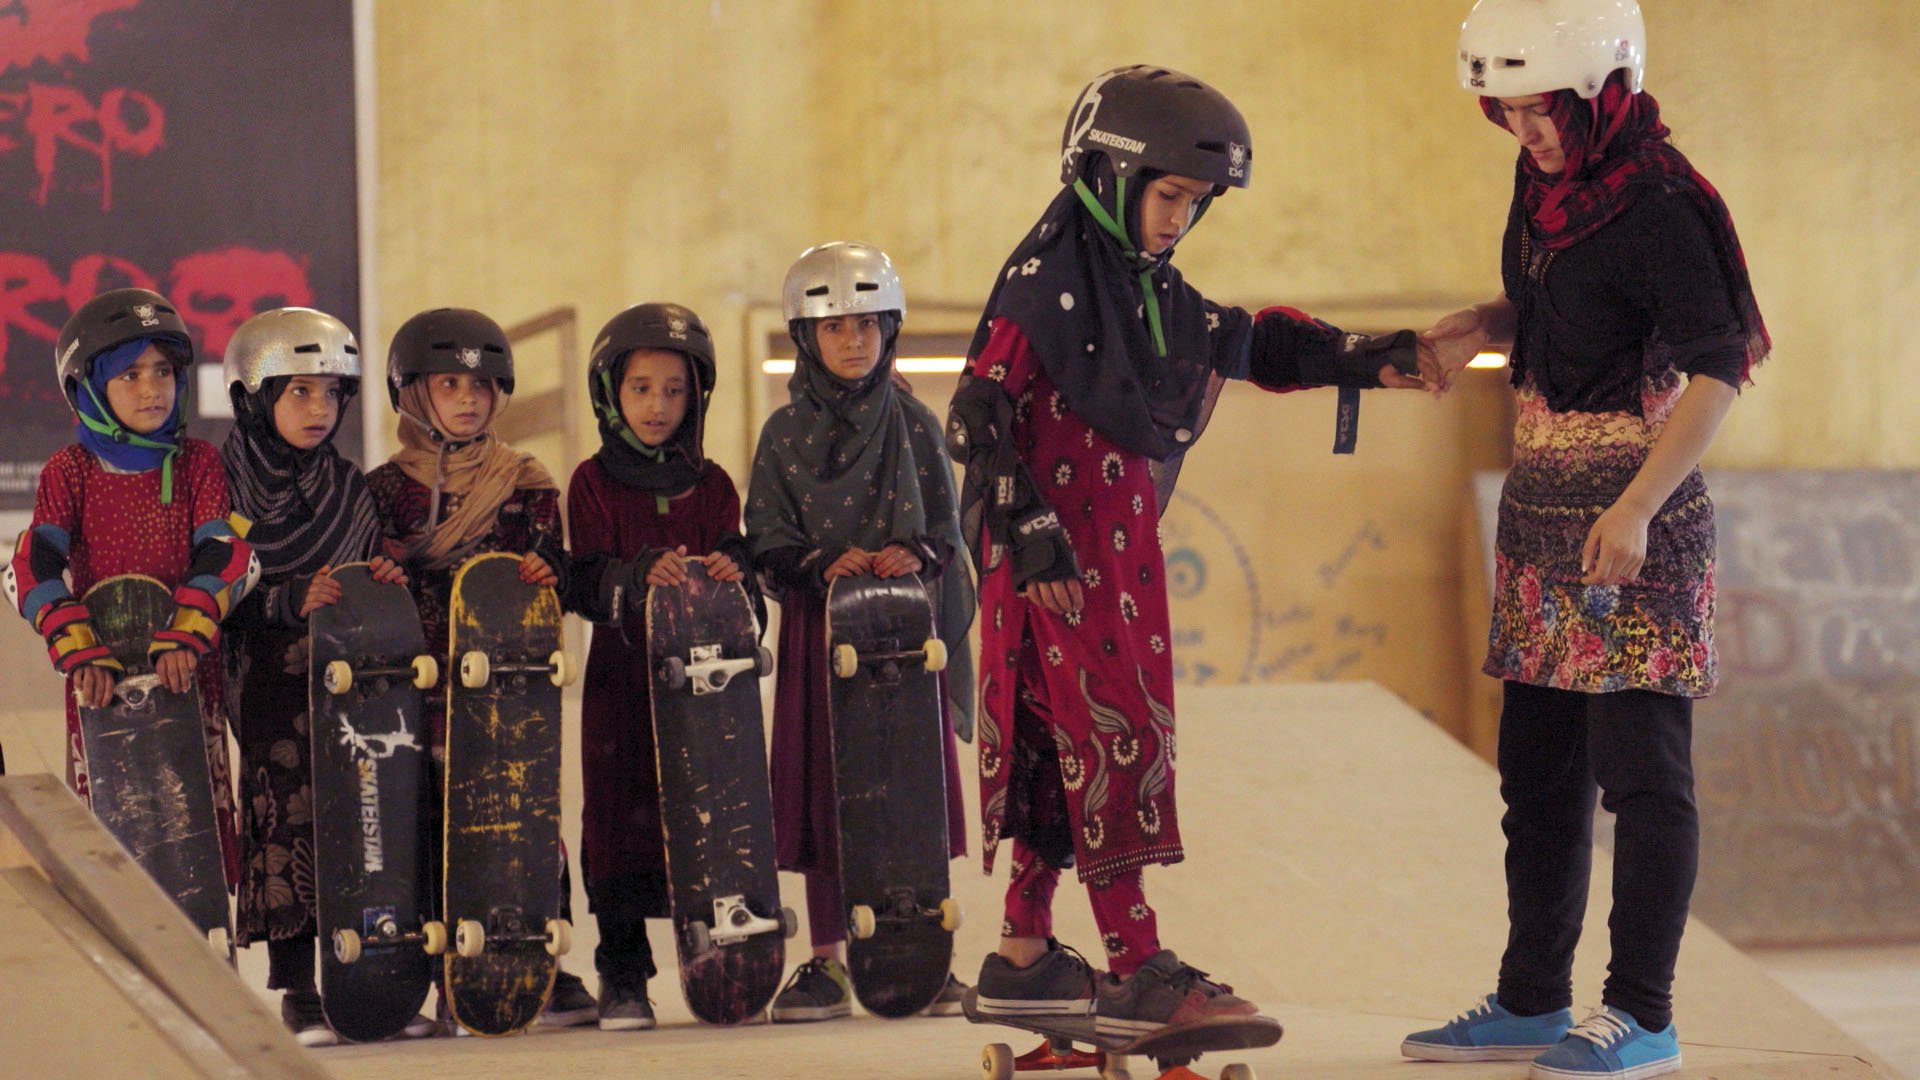 LEARNING TO SKATEBOARD IN A WARZONE (IF YOU’RE A GIRL)